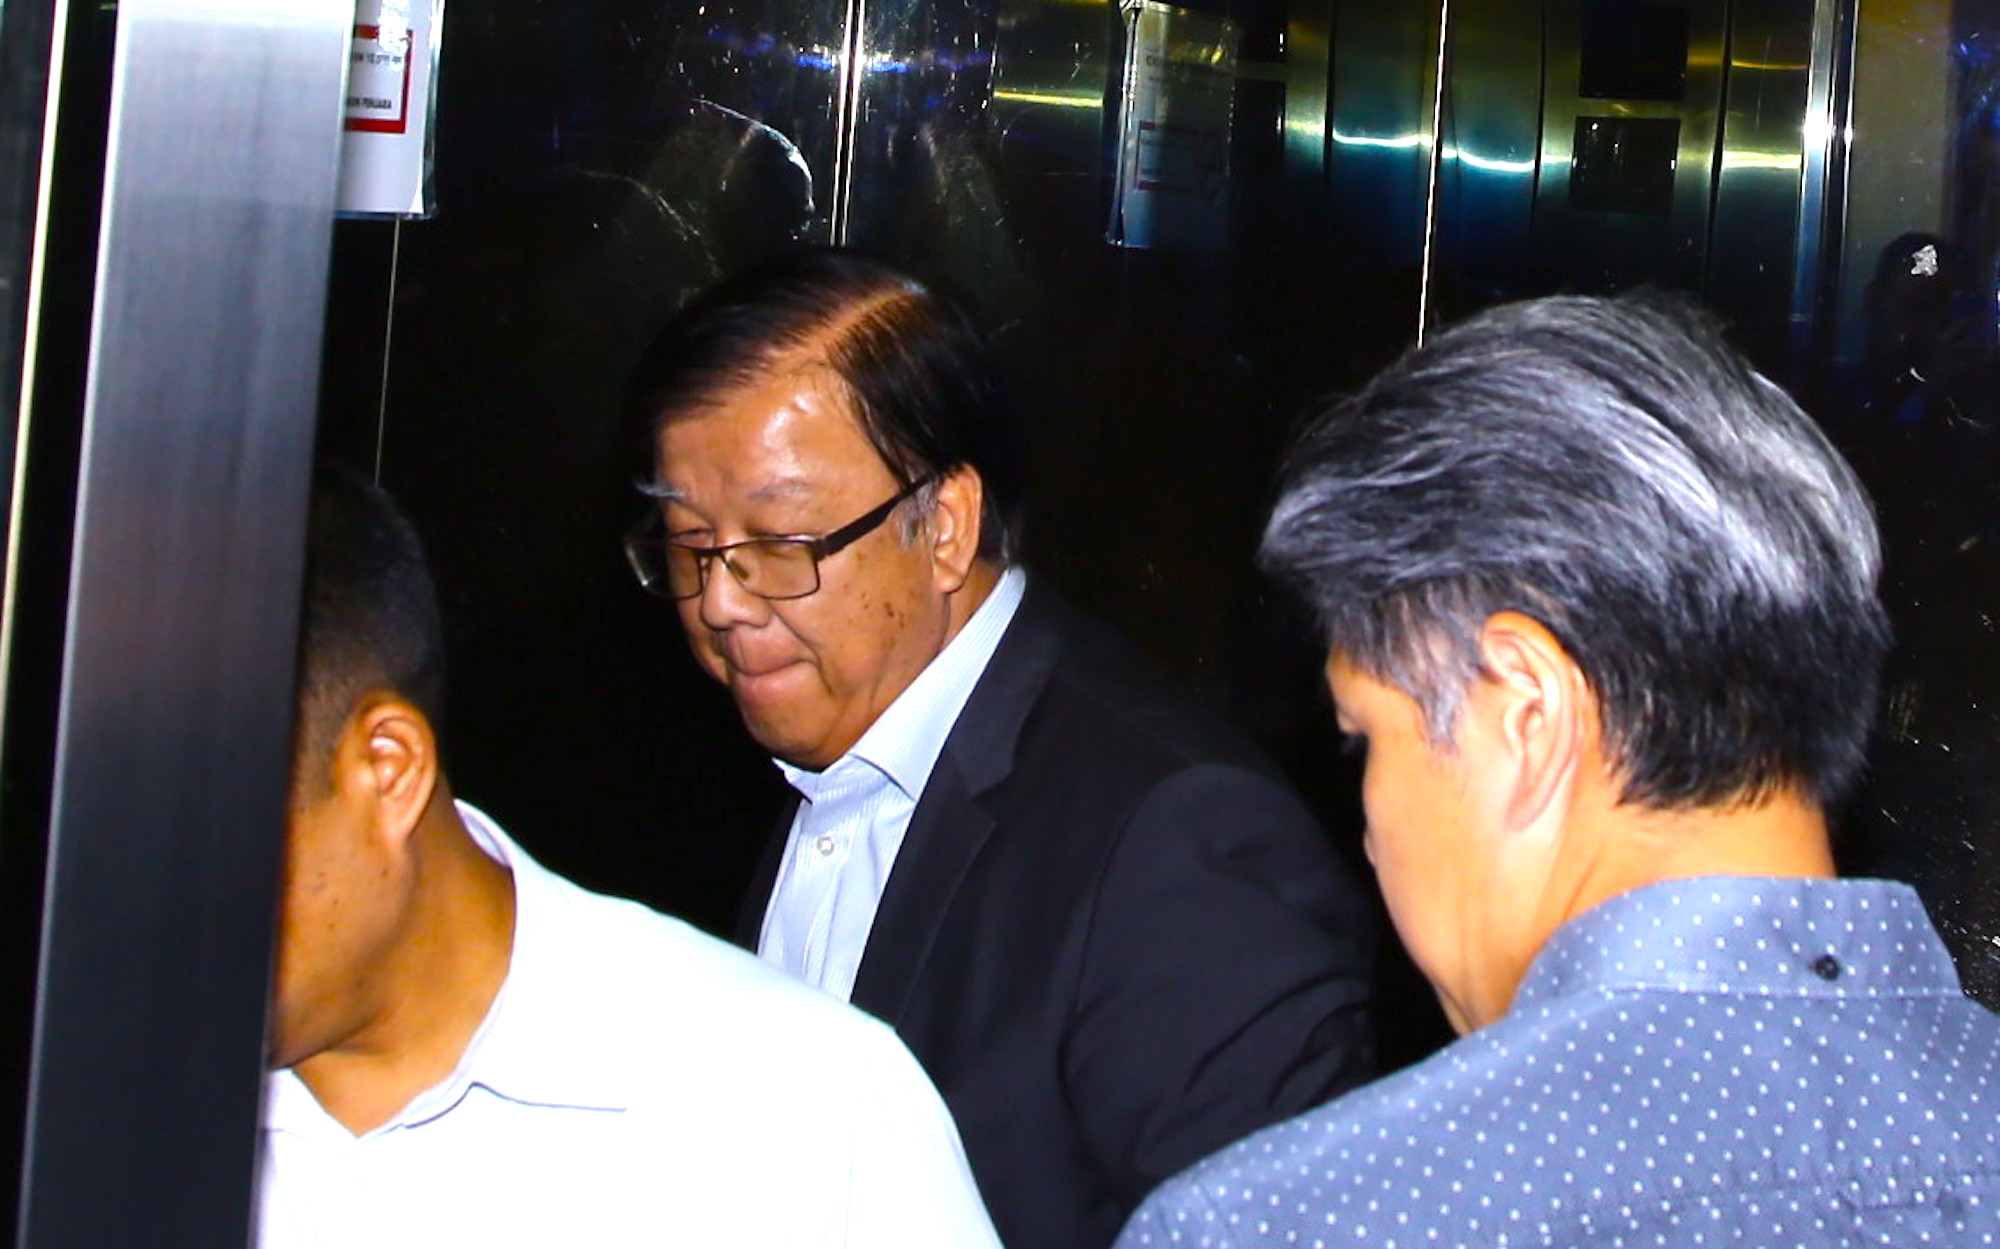 Chong Ket Pen trialed on RM368 million claims on Protasco Bhd Oil Deal.